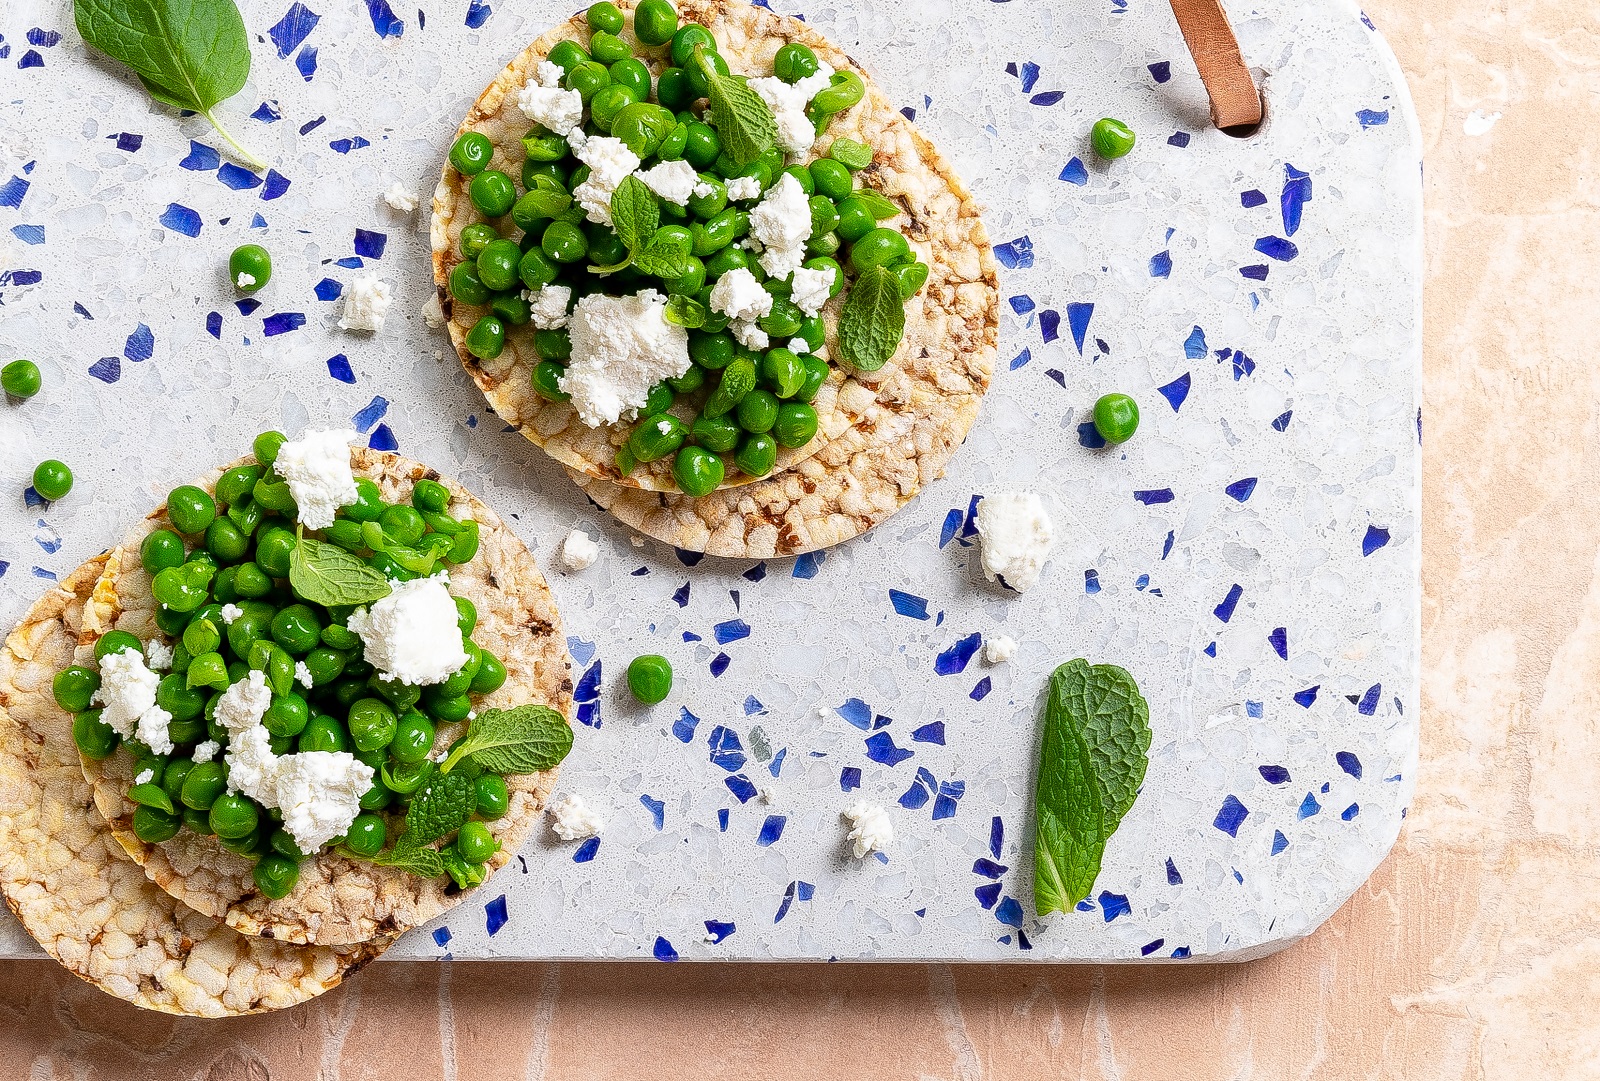 Minted Pea Smash with feta on Corn Thins slices